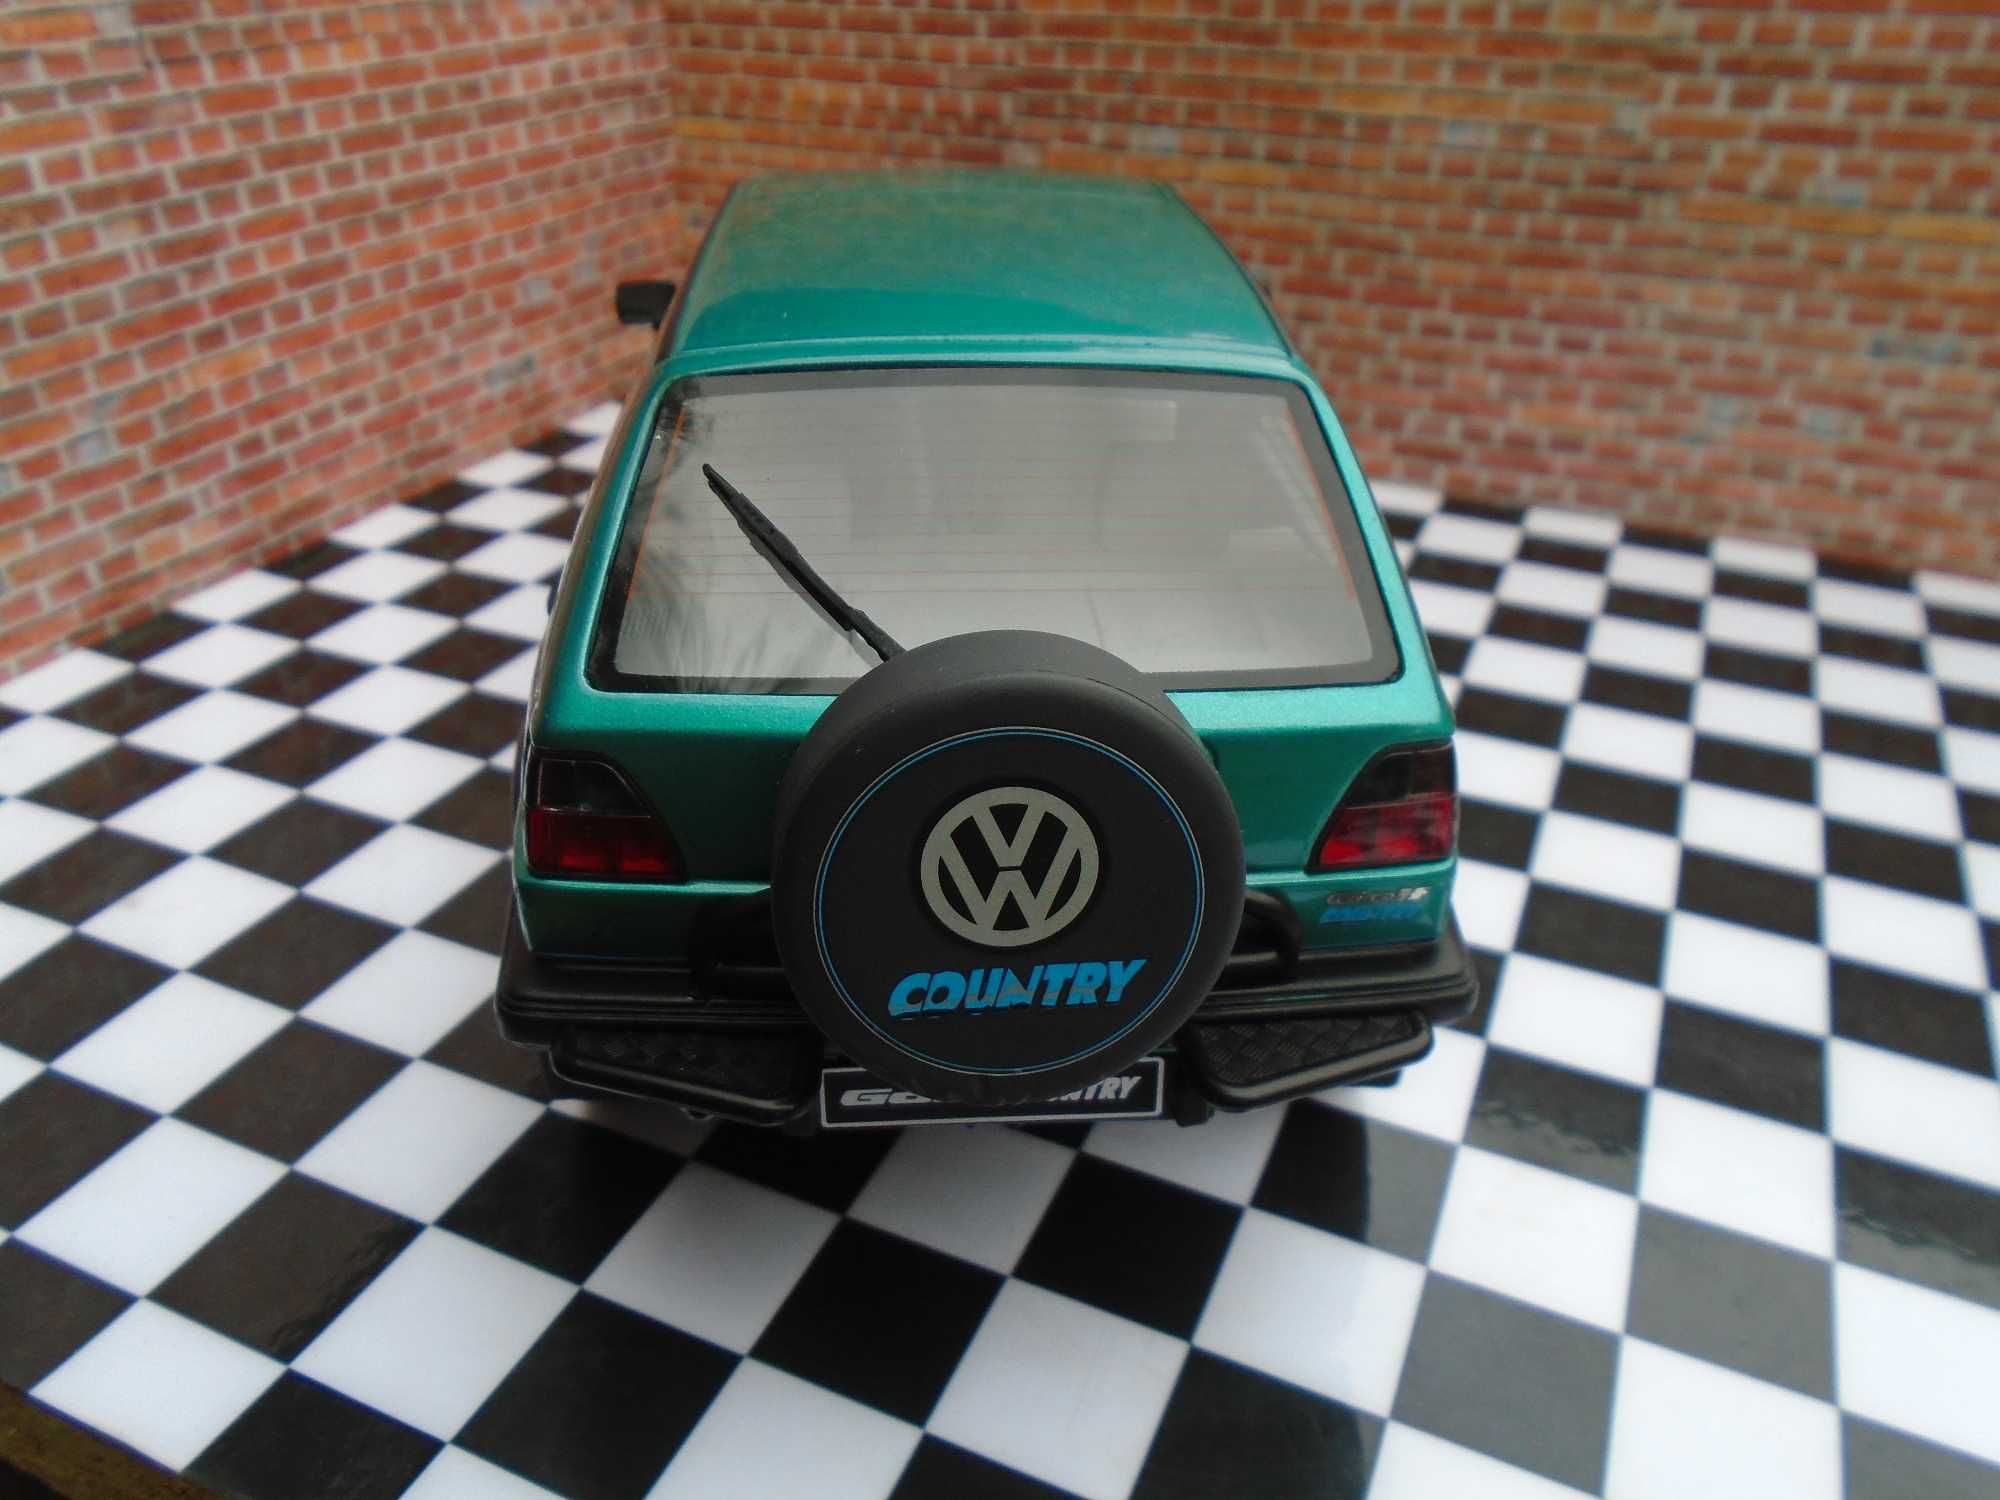 Volkswagen VW Golf II Country 1990 Otto mobile 1:18